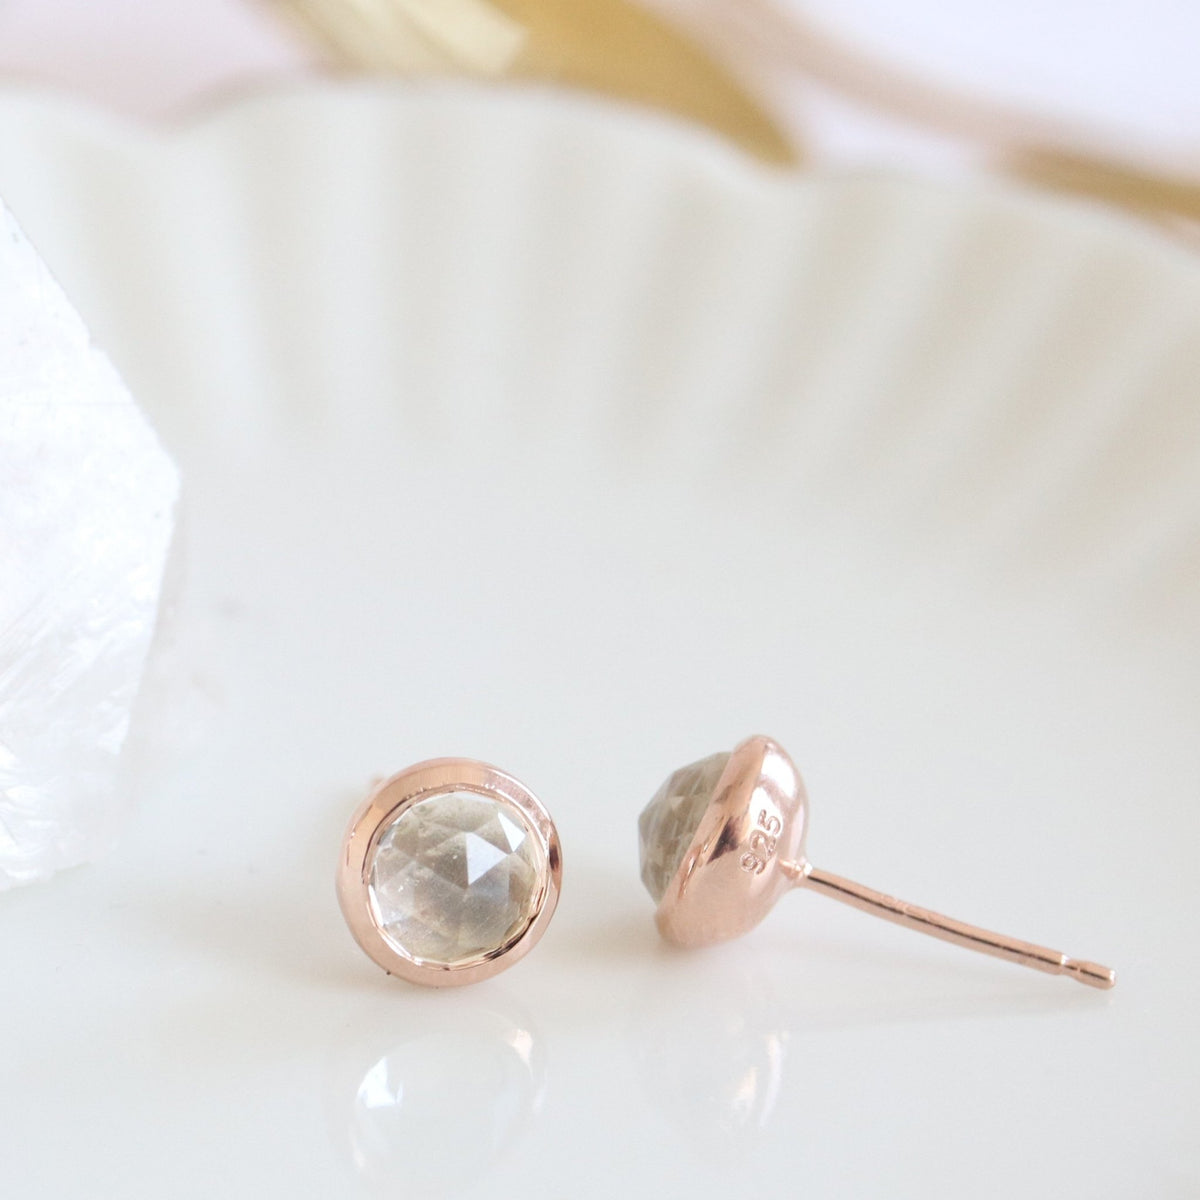 DAINTY LEGACY STUDS - WHITE TOPAZ &amp; ROSE GOLD - SO PRETTY CARA COTTER